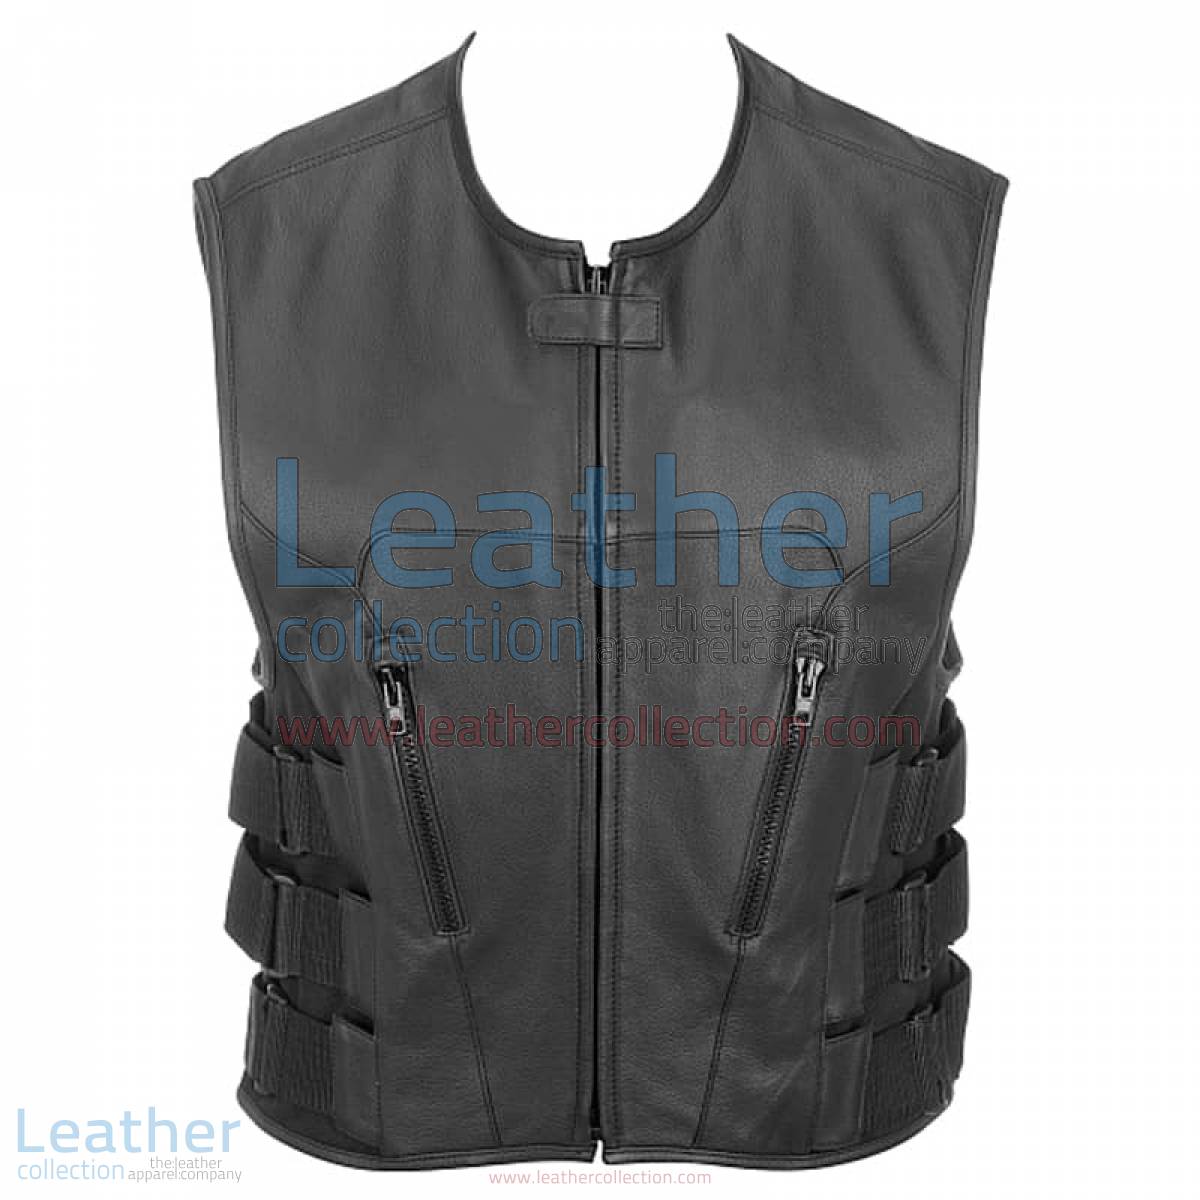 Leather Rider Vest with Velcro Side Straps